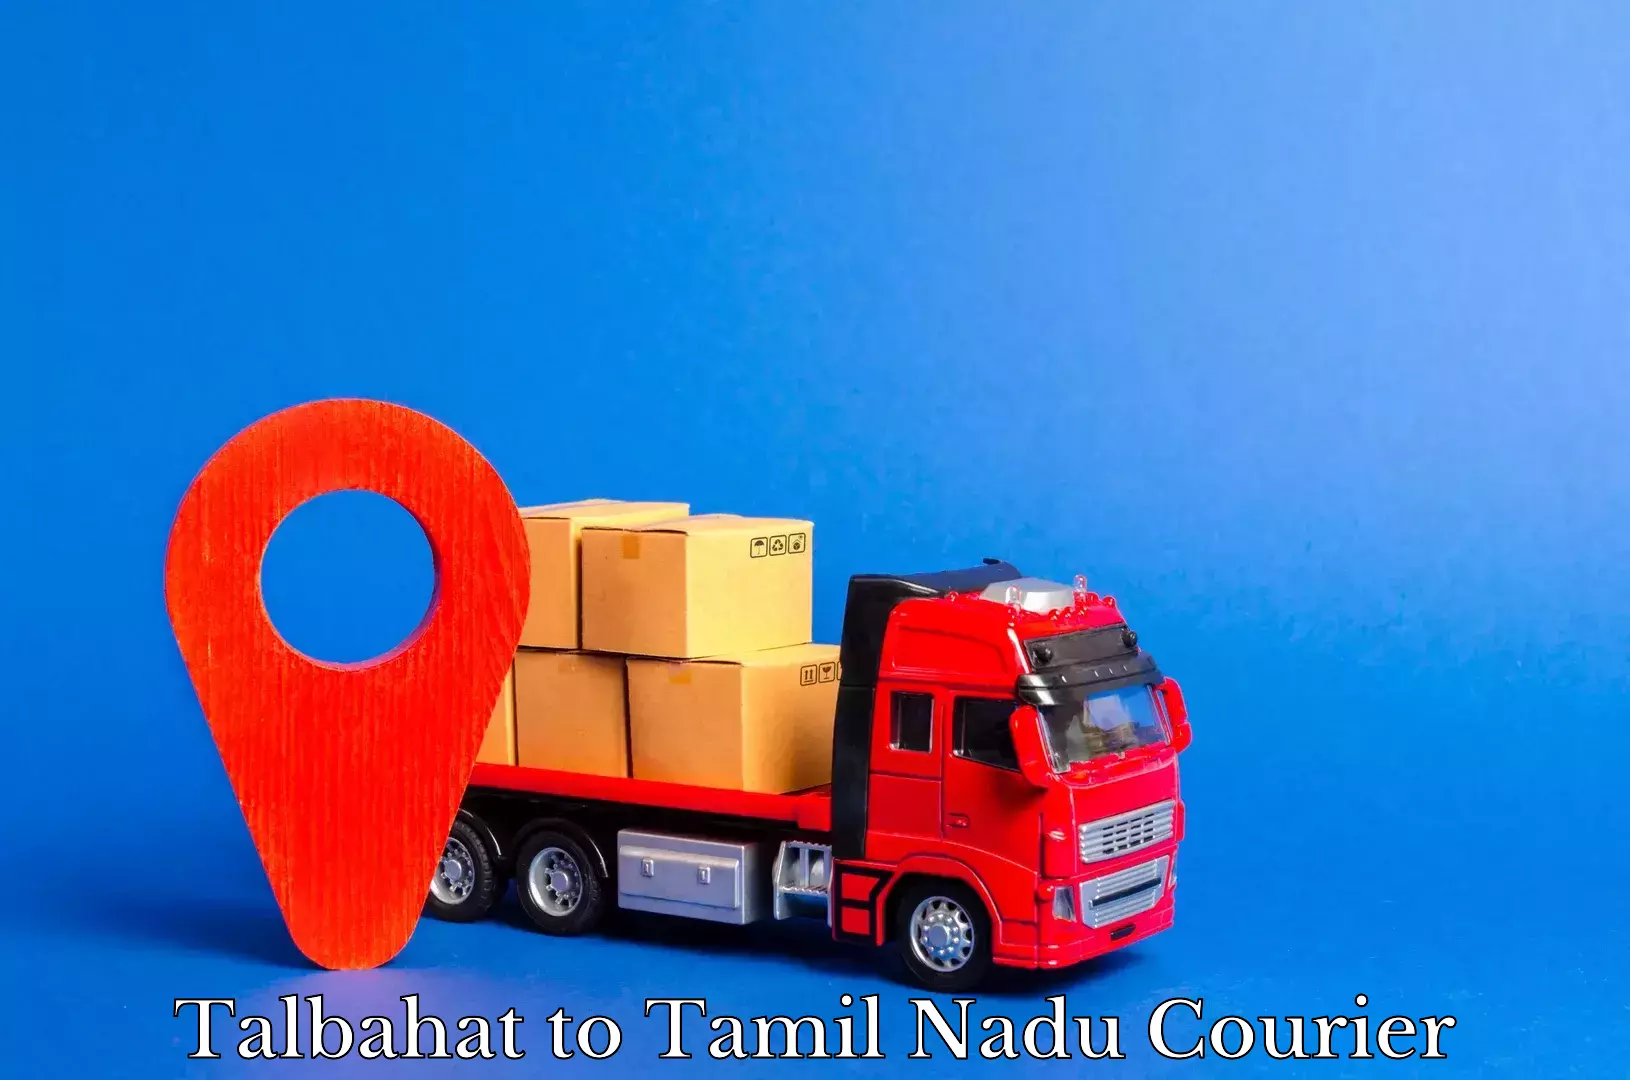 Reliable courier service in Talbahat to Tamil Nadu